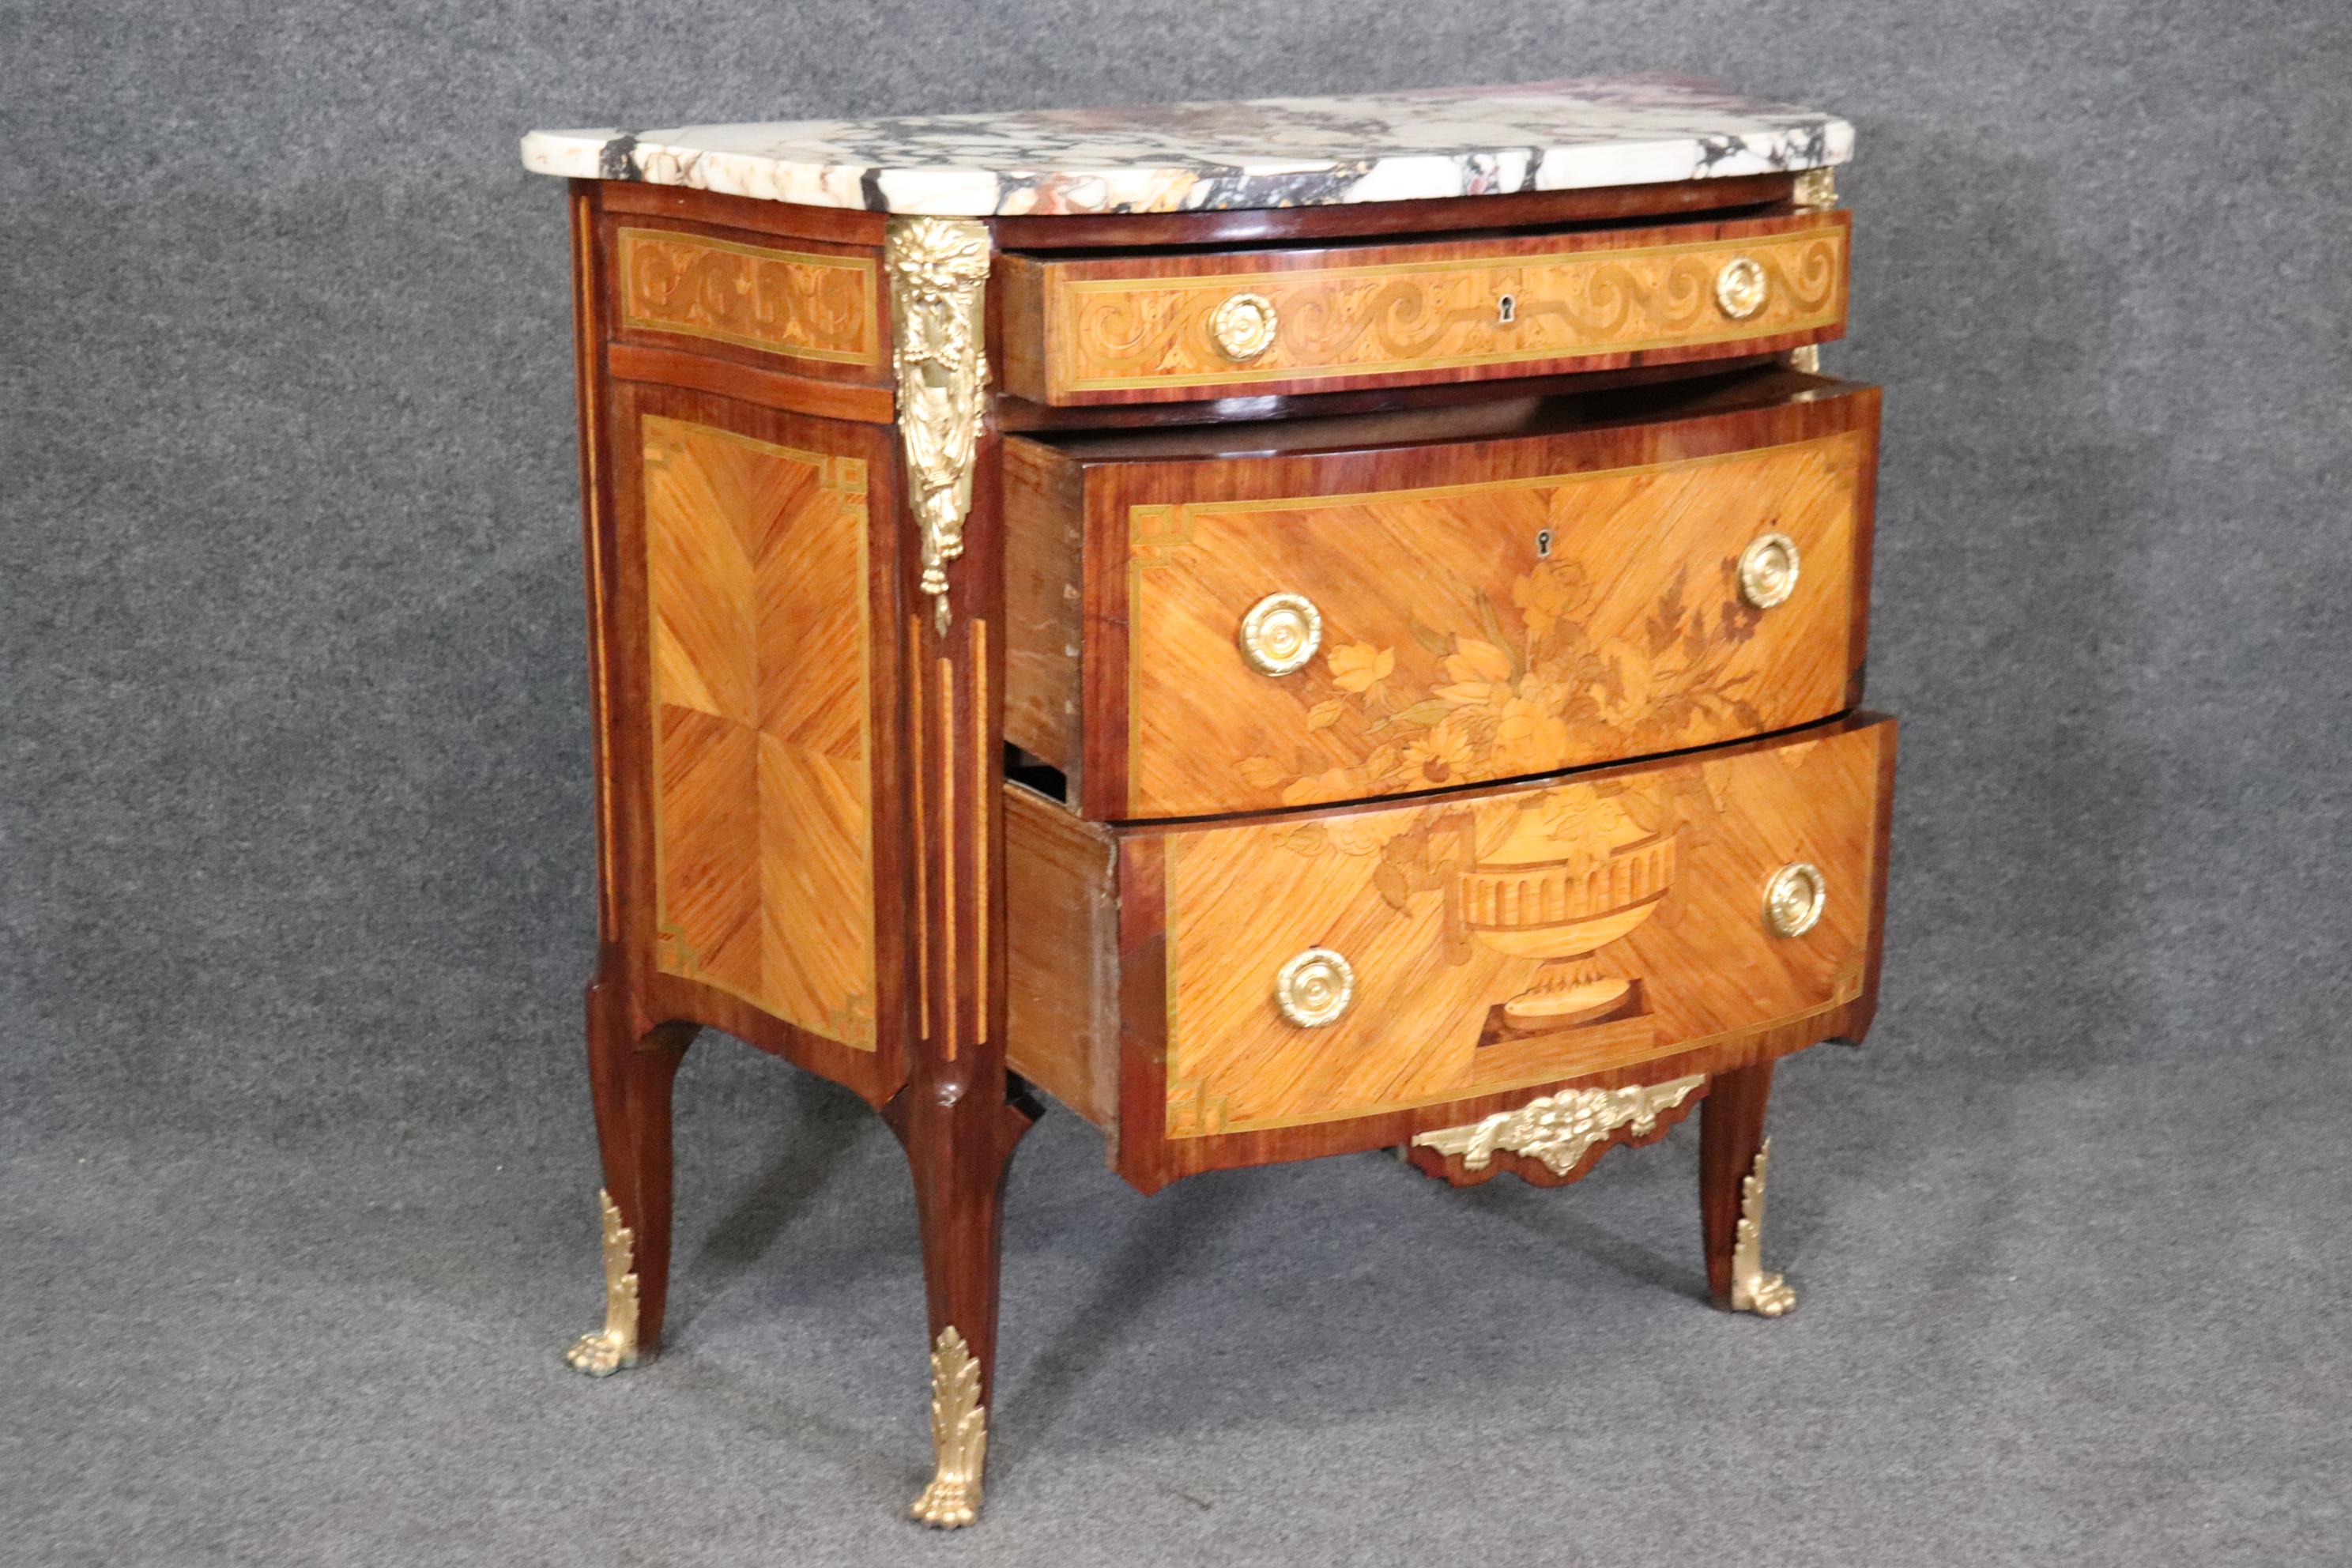 Museum Quality Restored 19th Century Inlaid Marble Top Louis XV Bronze Commode For Sale 8